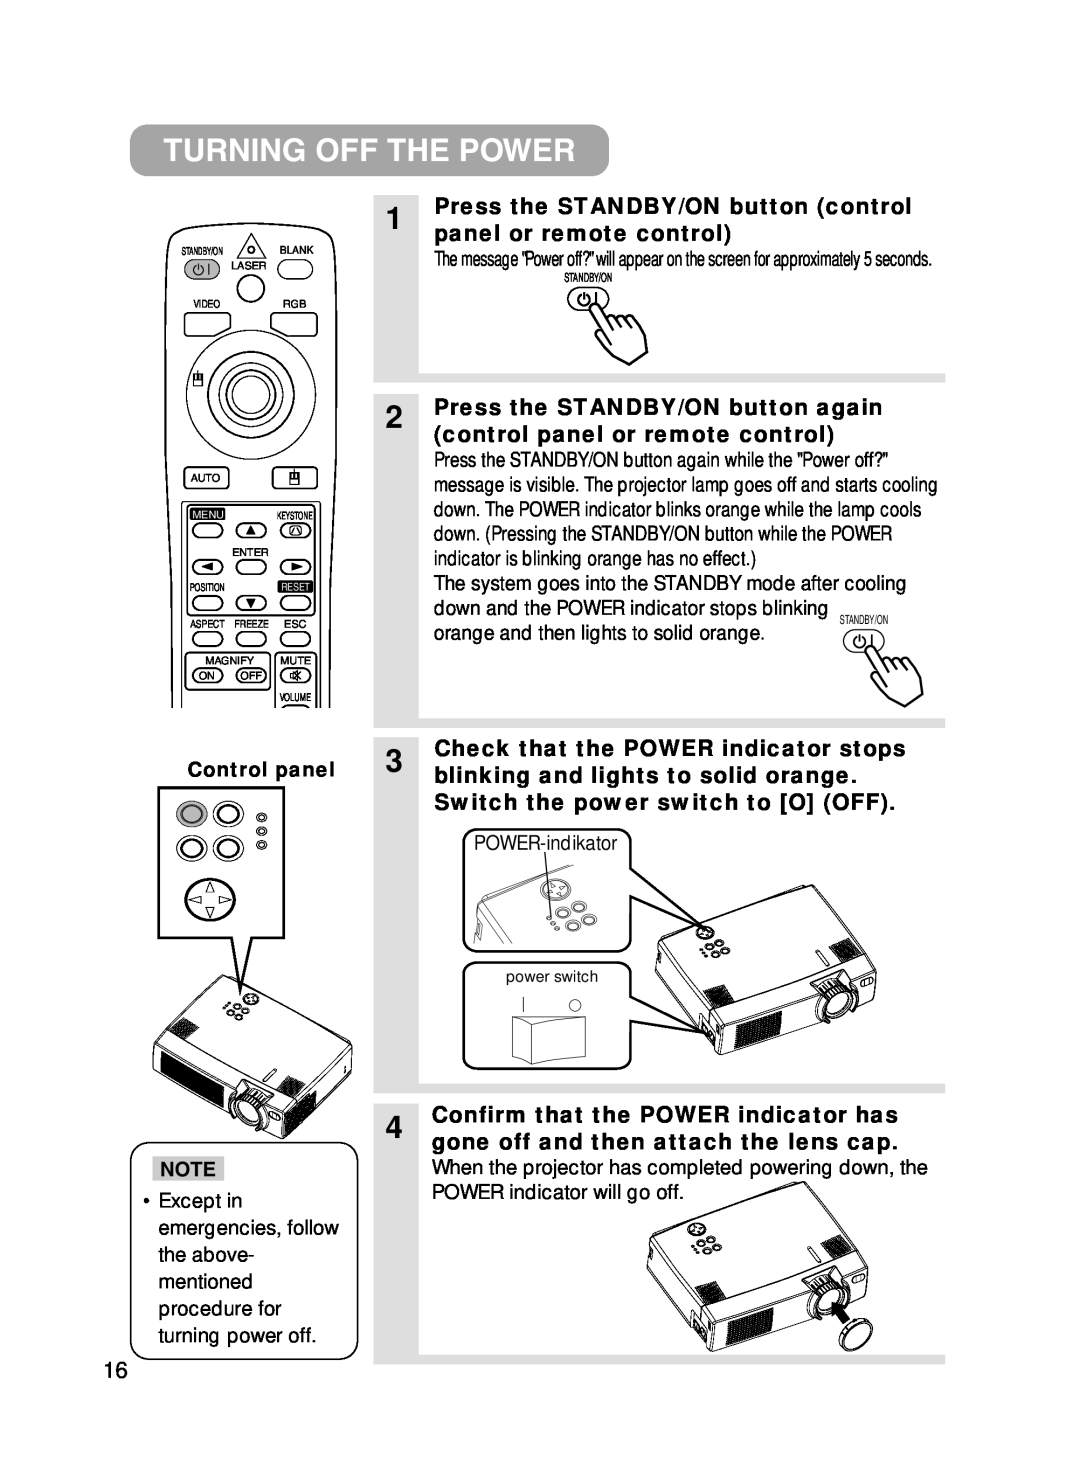 Hitachi CPX385W user manual Turning Off The Power, Press the STANDBY/ON button control, panel or remote control 